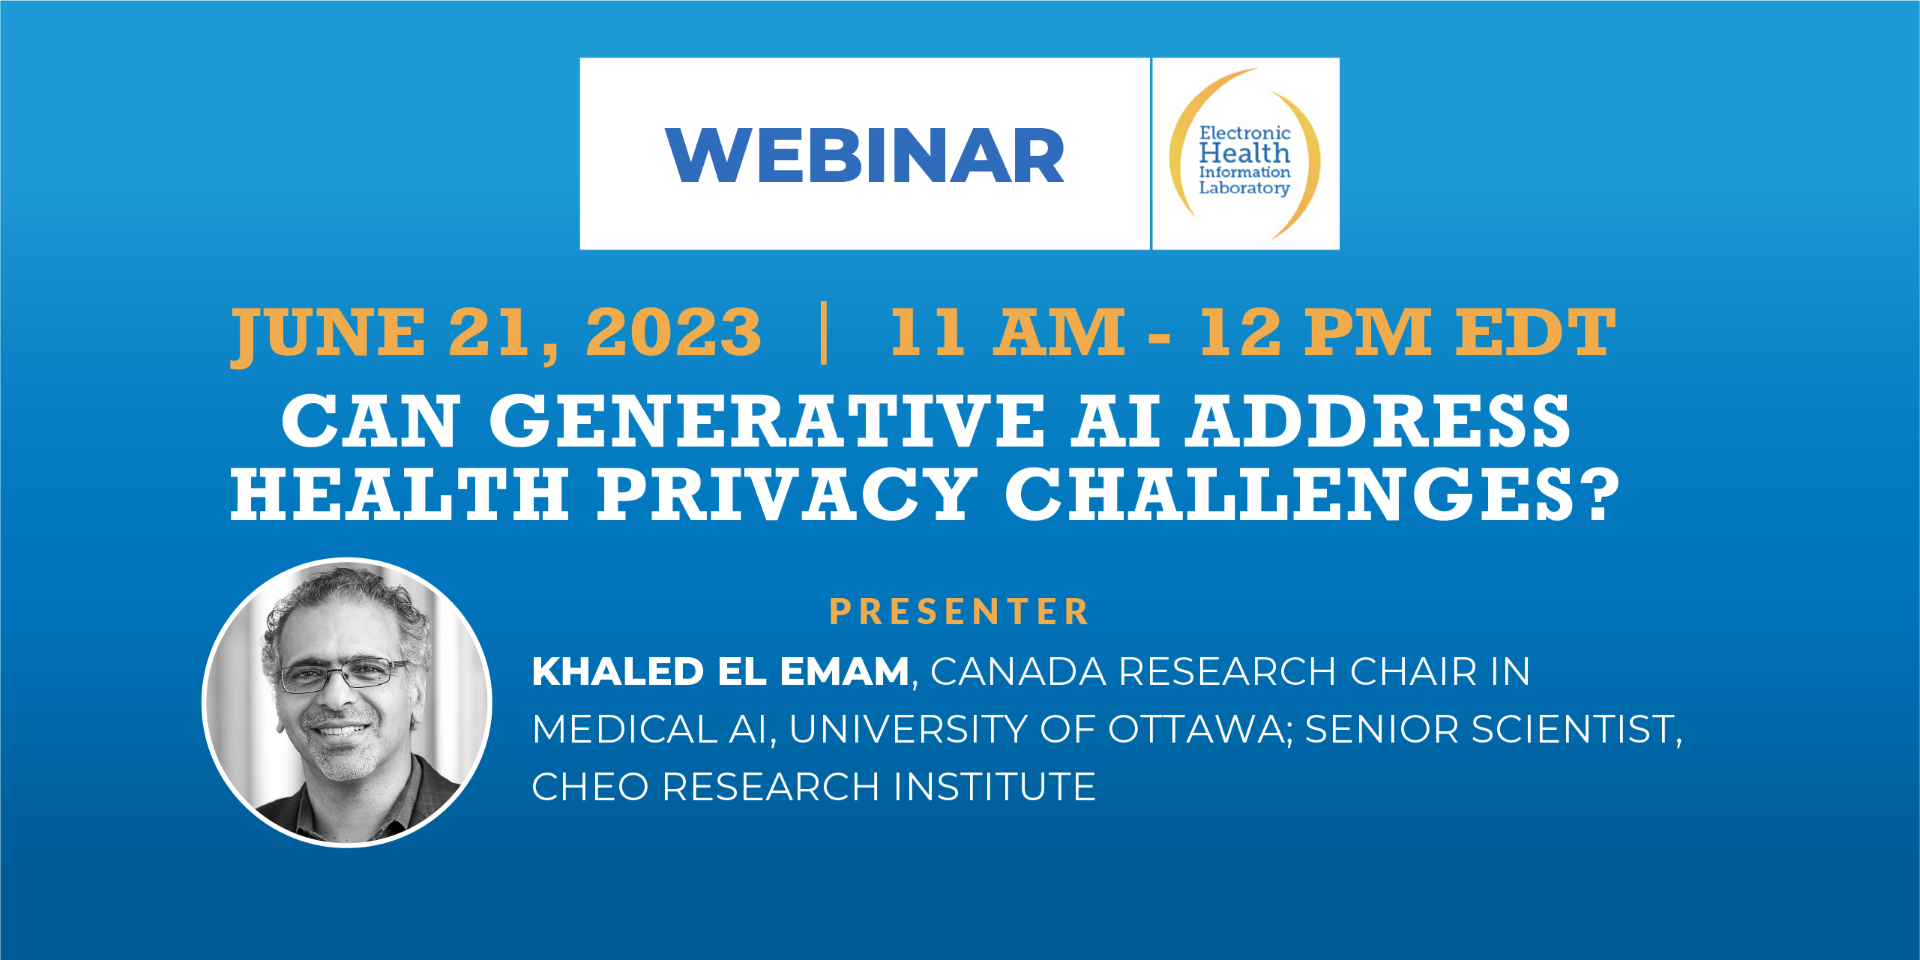 Webinar: Can Generative AI Address Health Privacy Challenges?